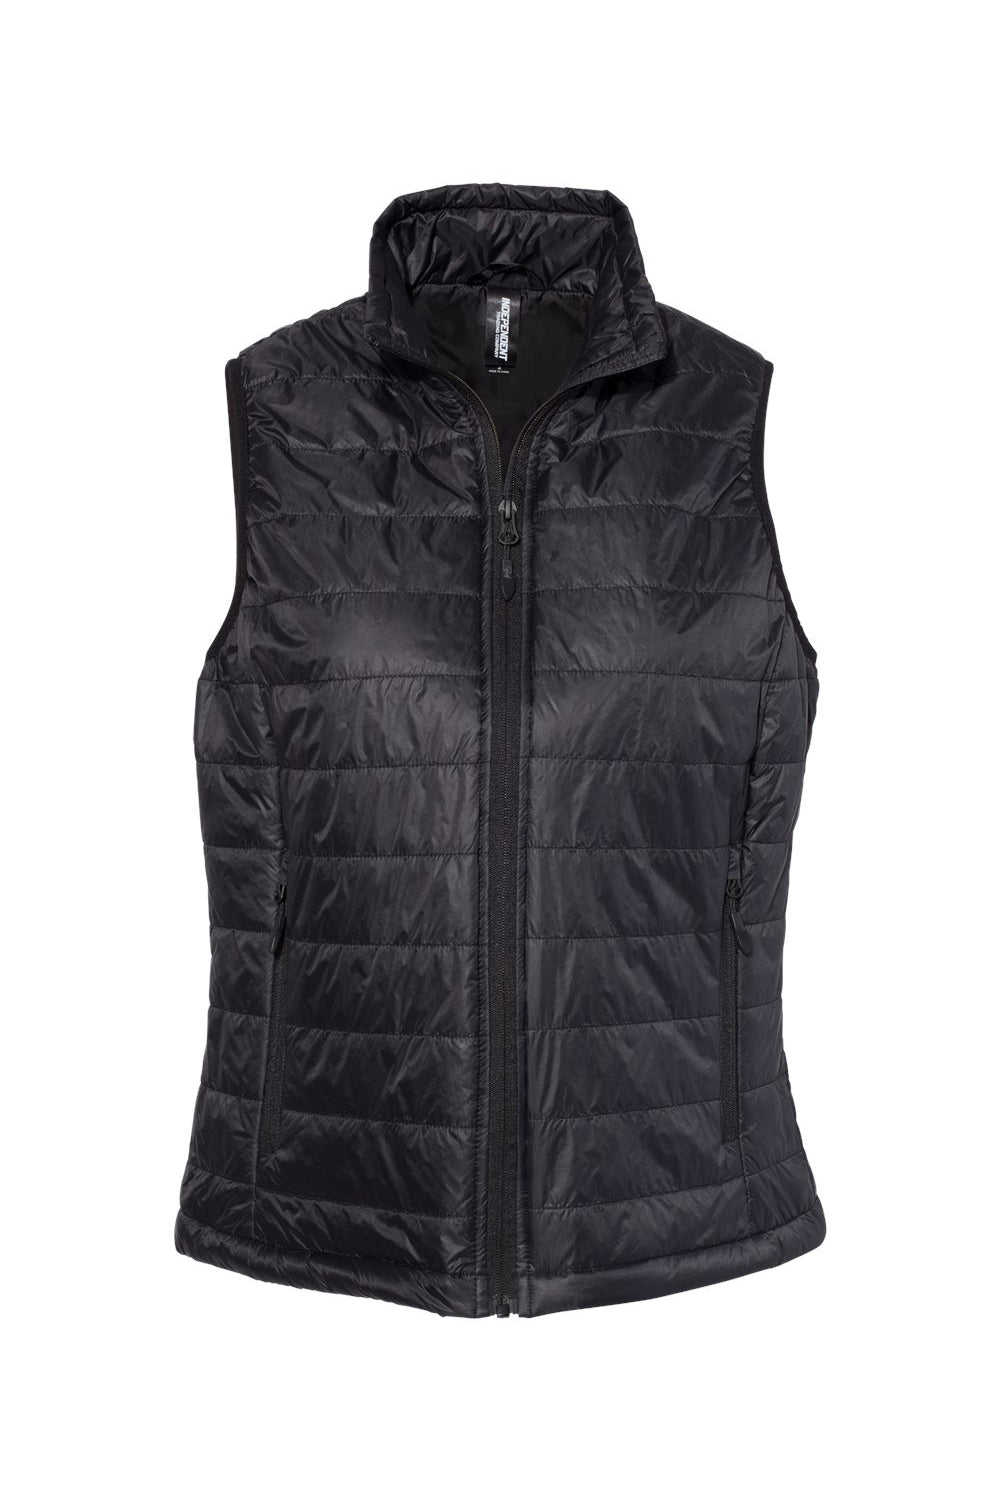 Independent Trading Co. EXP220PFV Womens Full Zip Puffer Vest Black Flat Front